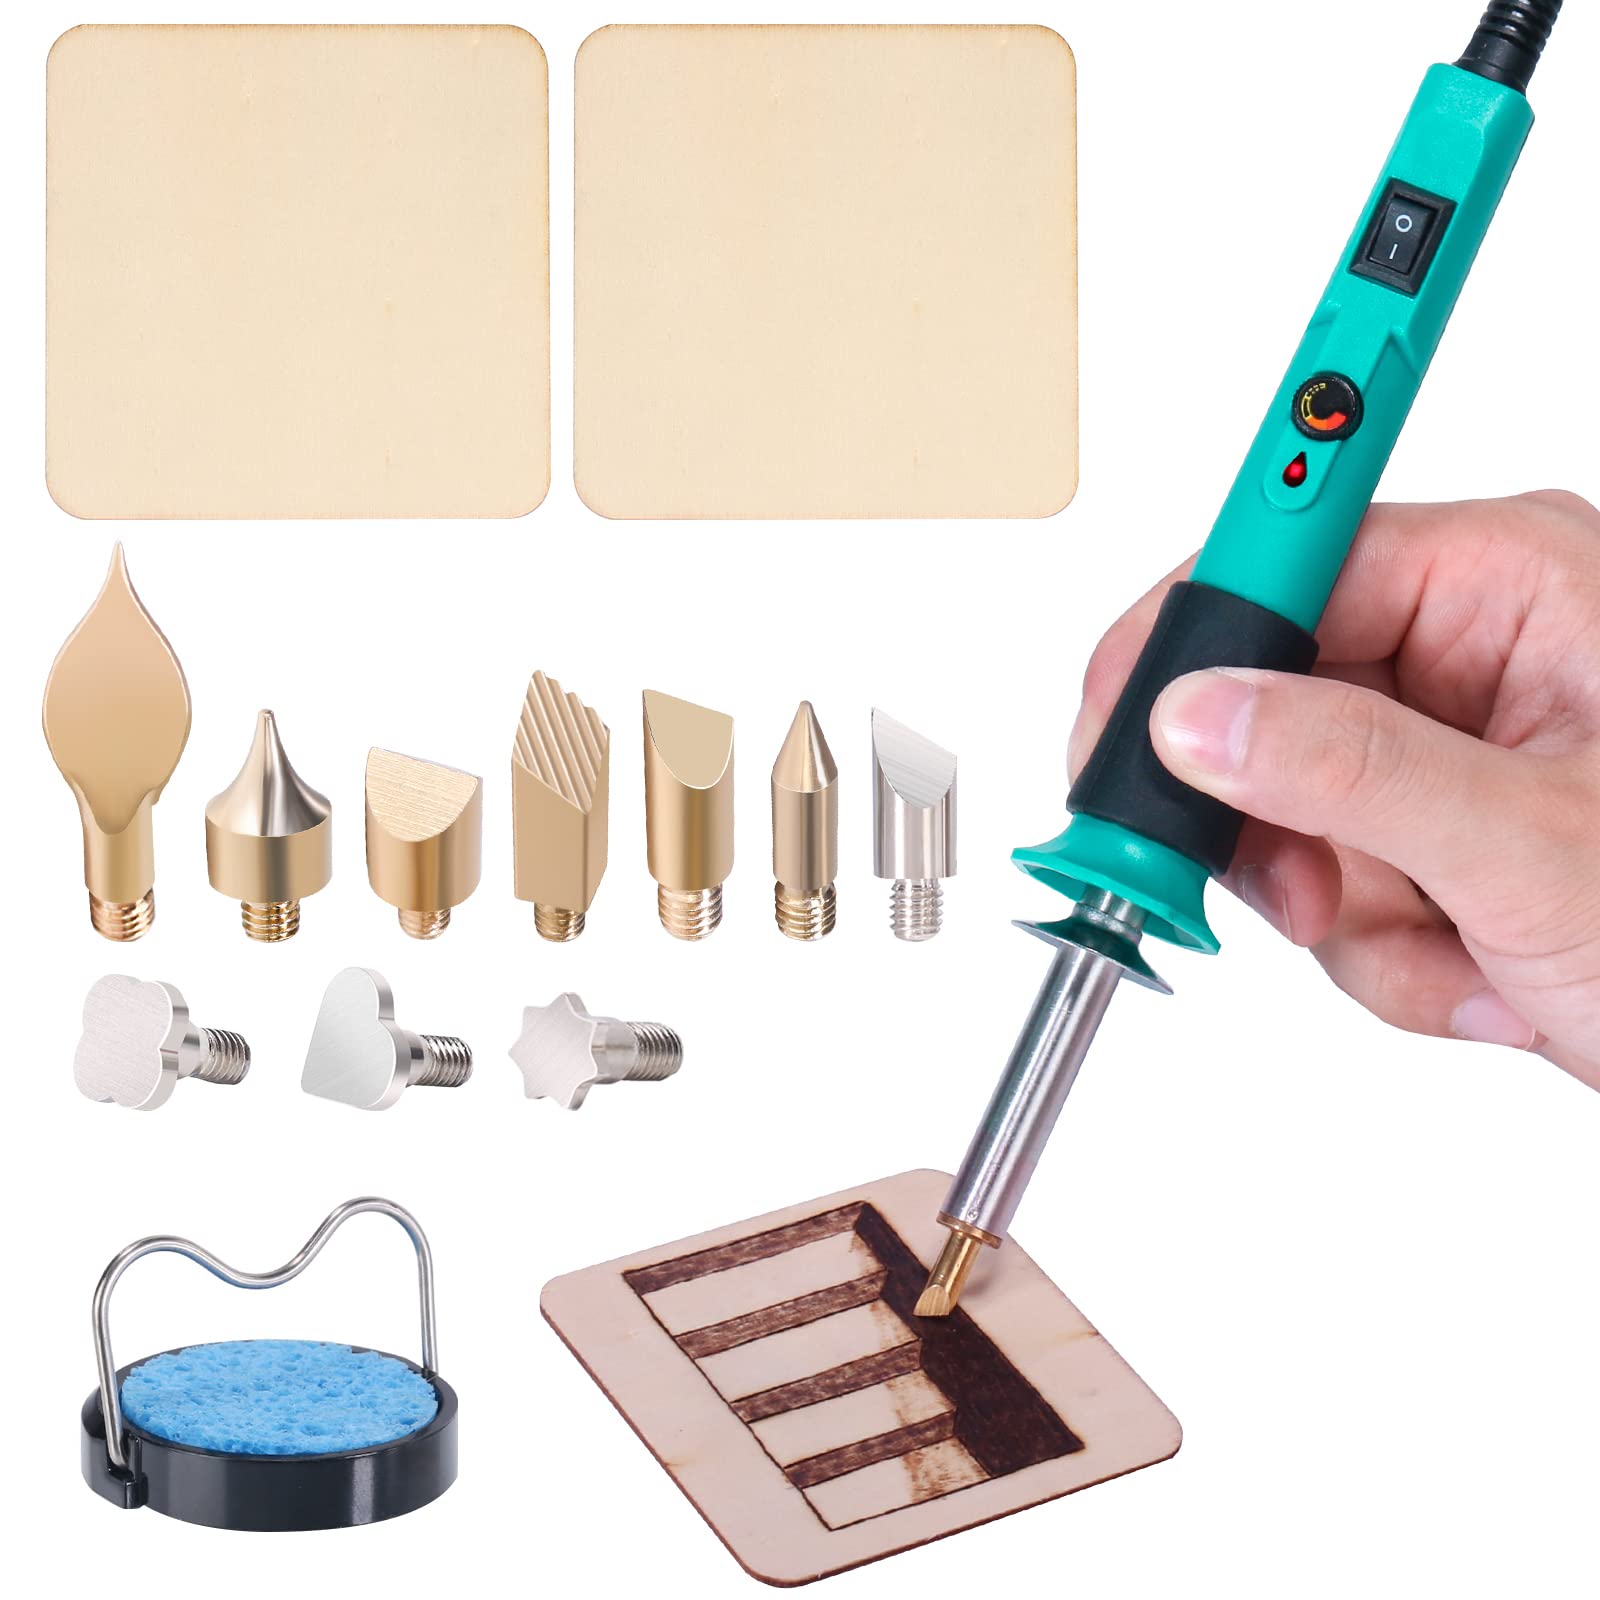 YIHUA 930-IV Pyrography Wood Burning Pen Kit Adjustable Temperature, Power  Switch, Heat Deflector, Rubber Grip with 13PCS Accessories, Stencil, Wood